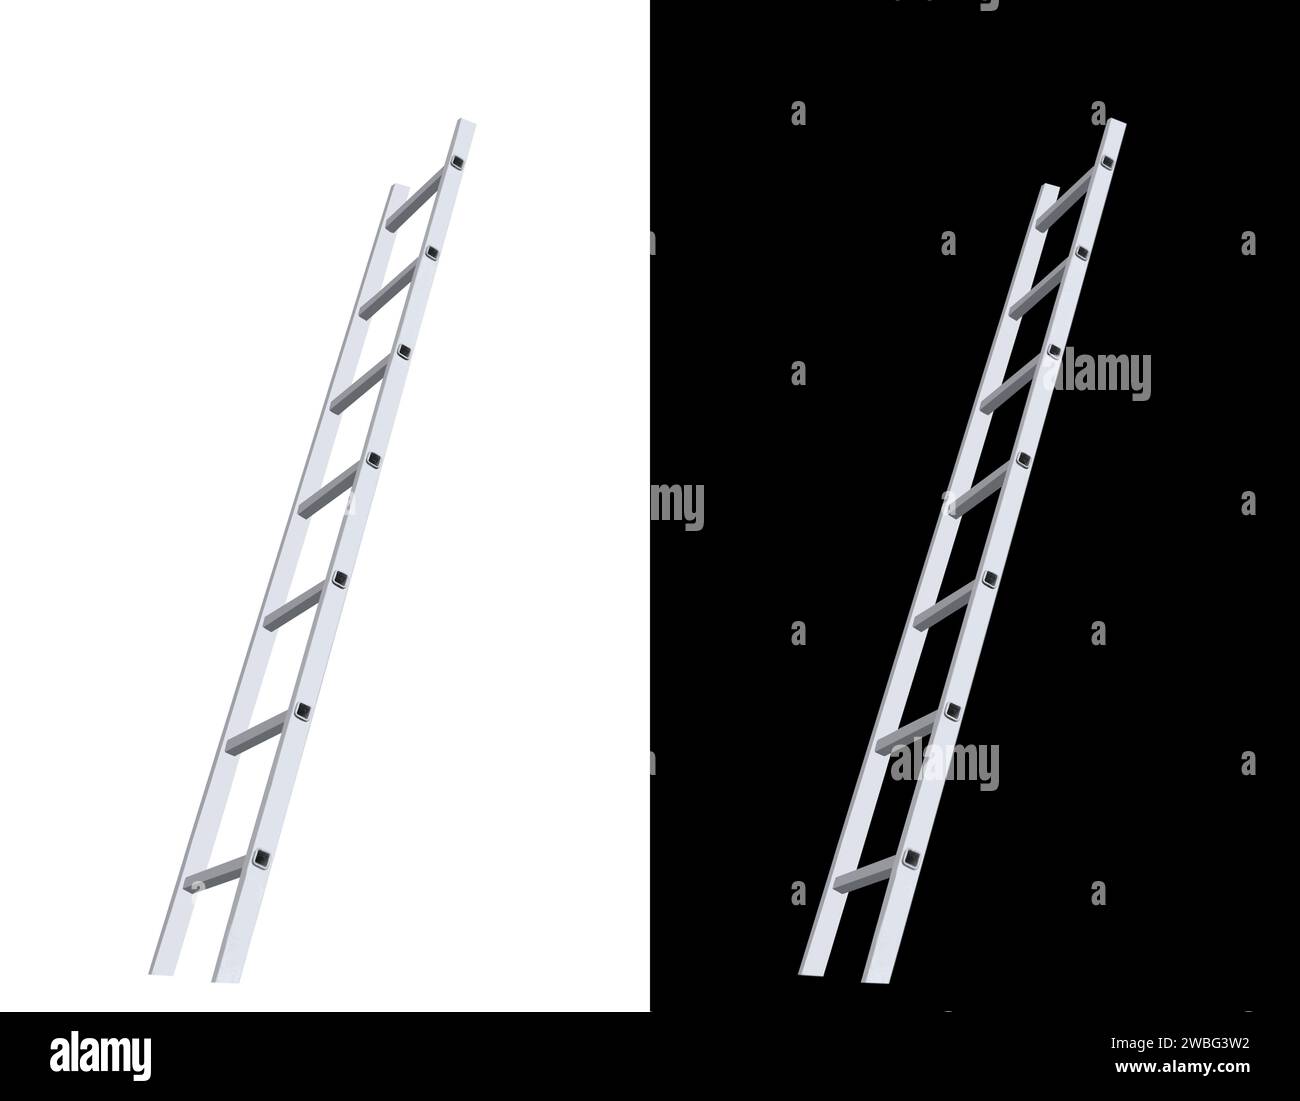 Side view illustration of metal aluminum ladder on an isolated white and black background Stock Photo